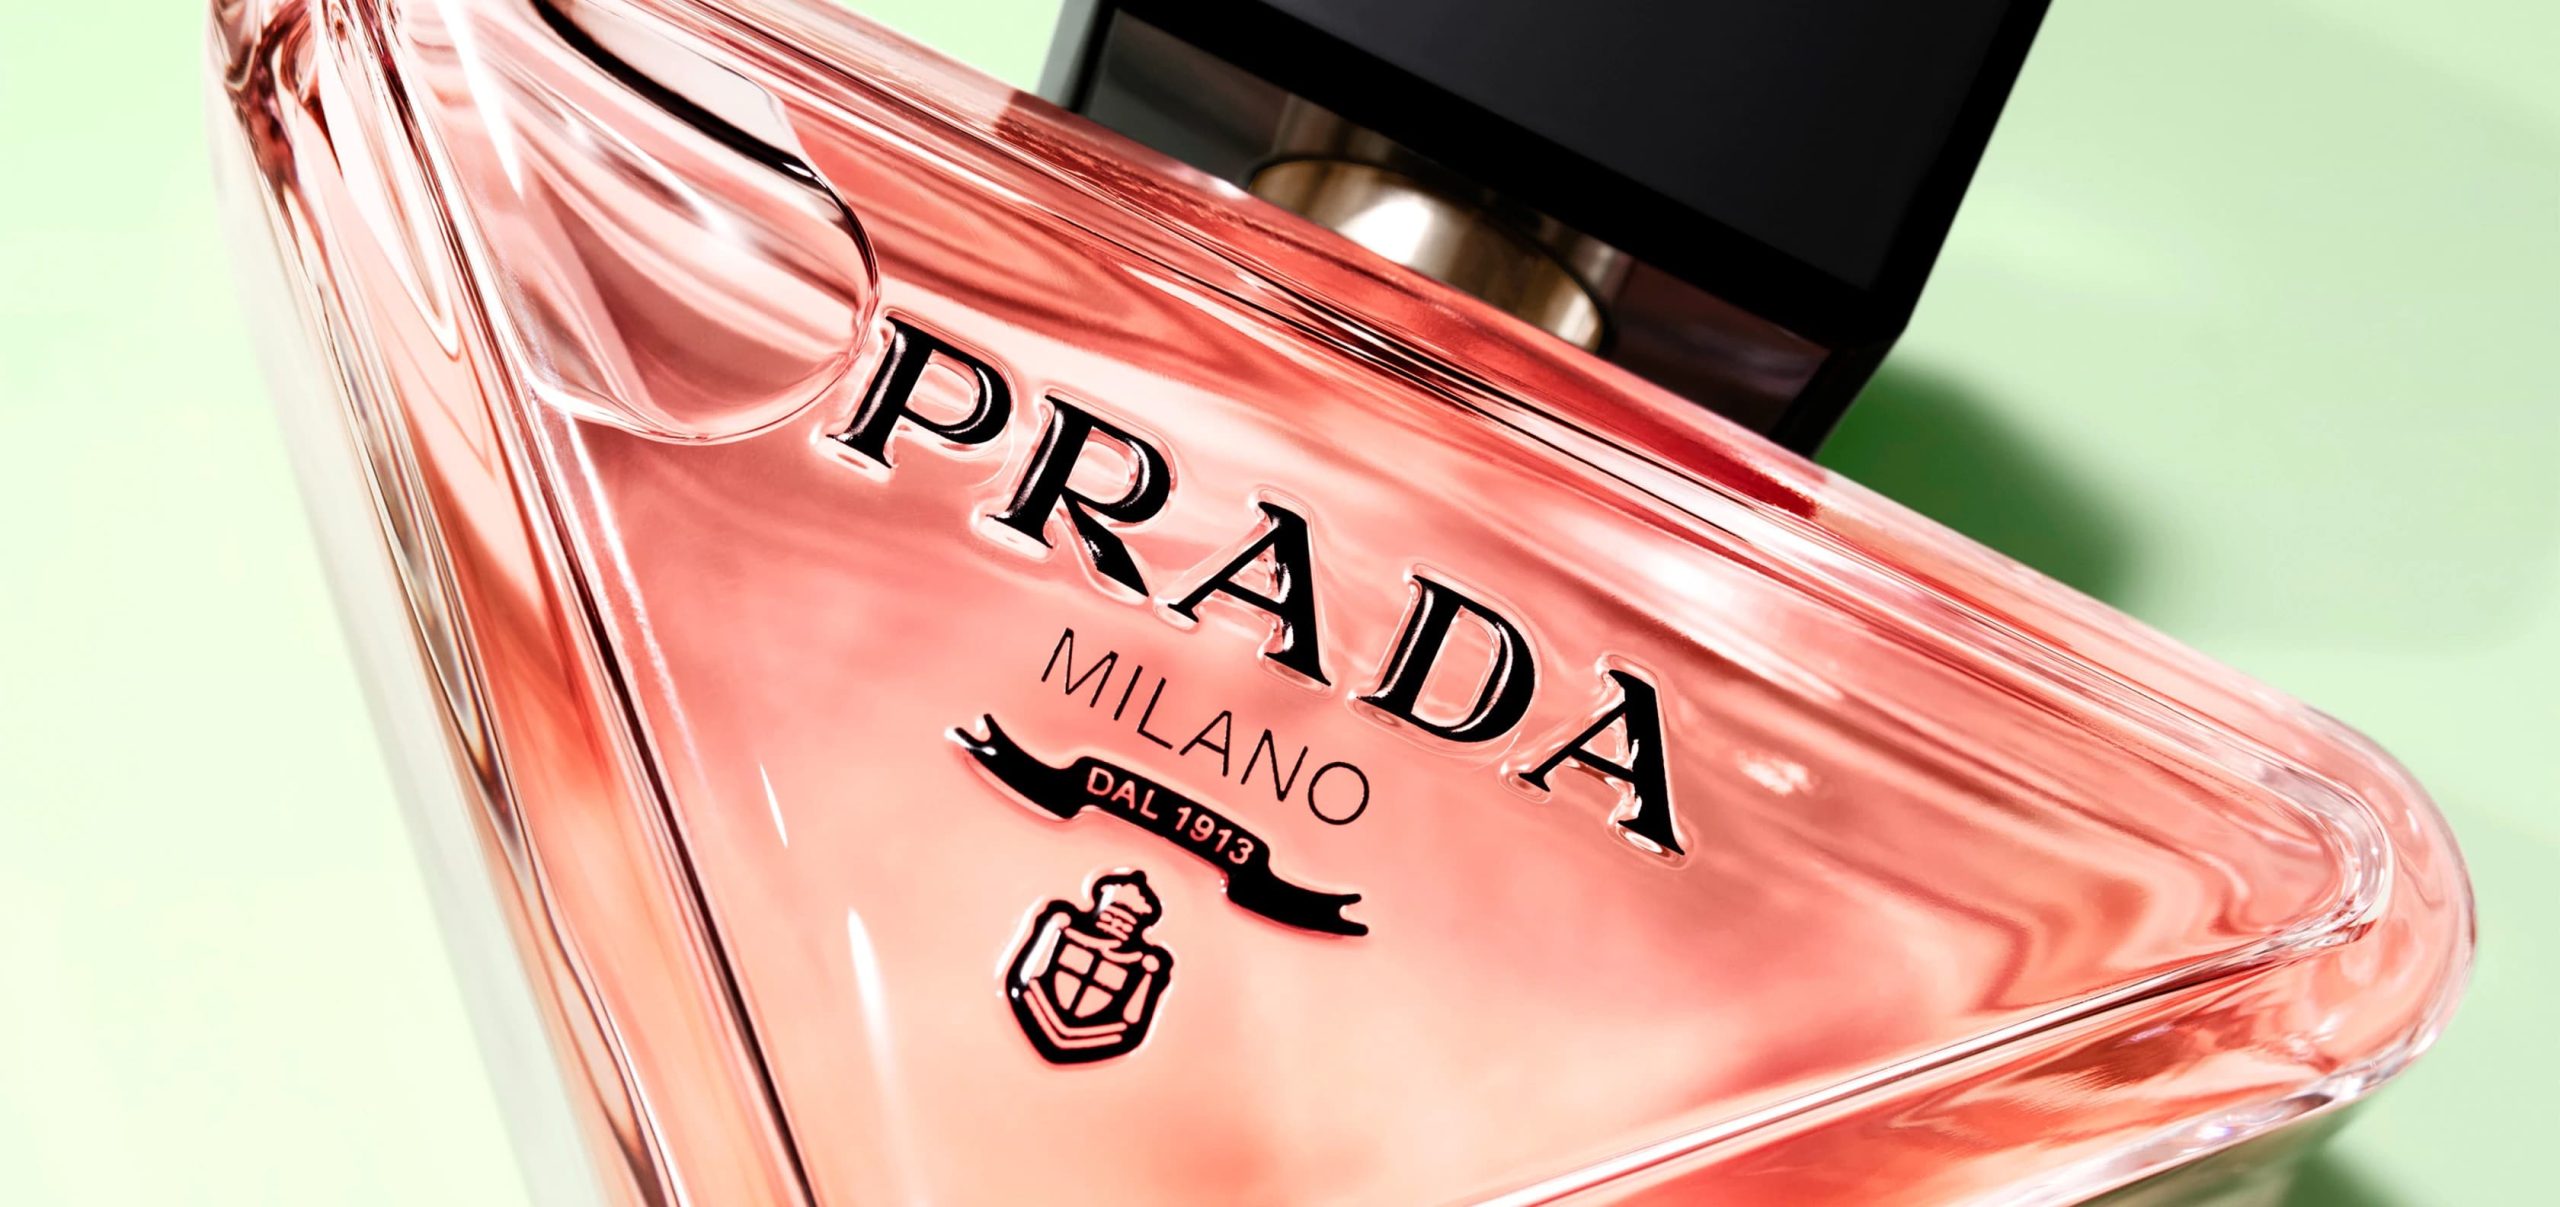 Emma Watson Directs Herself in the Prada Paradoxe Fragrance Campaign